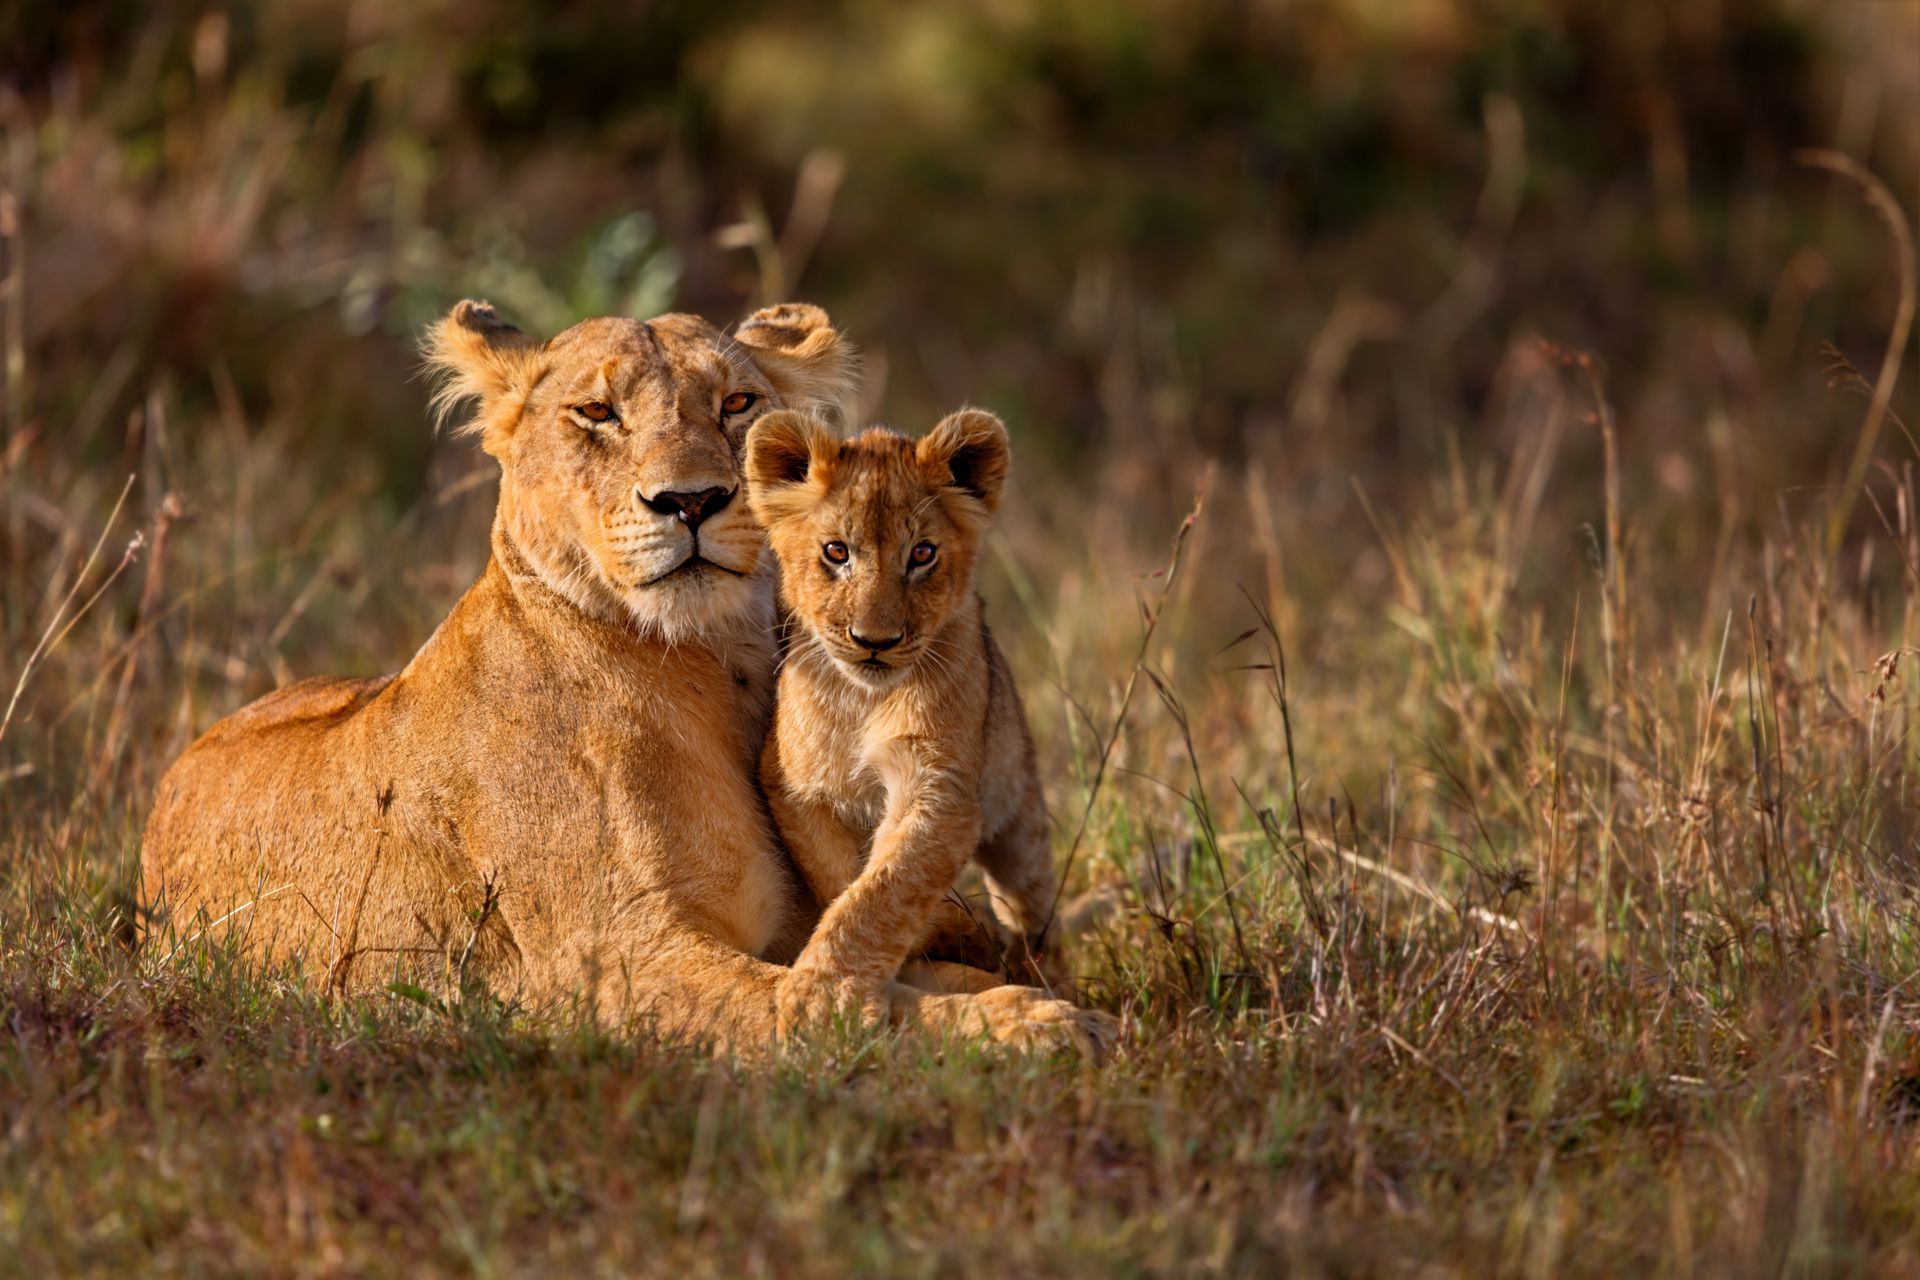 A lioness and her cub are laying in the grass.